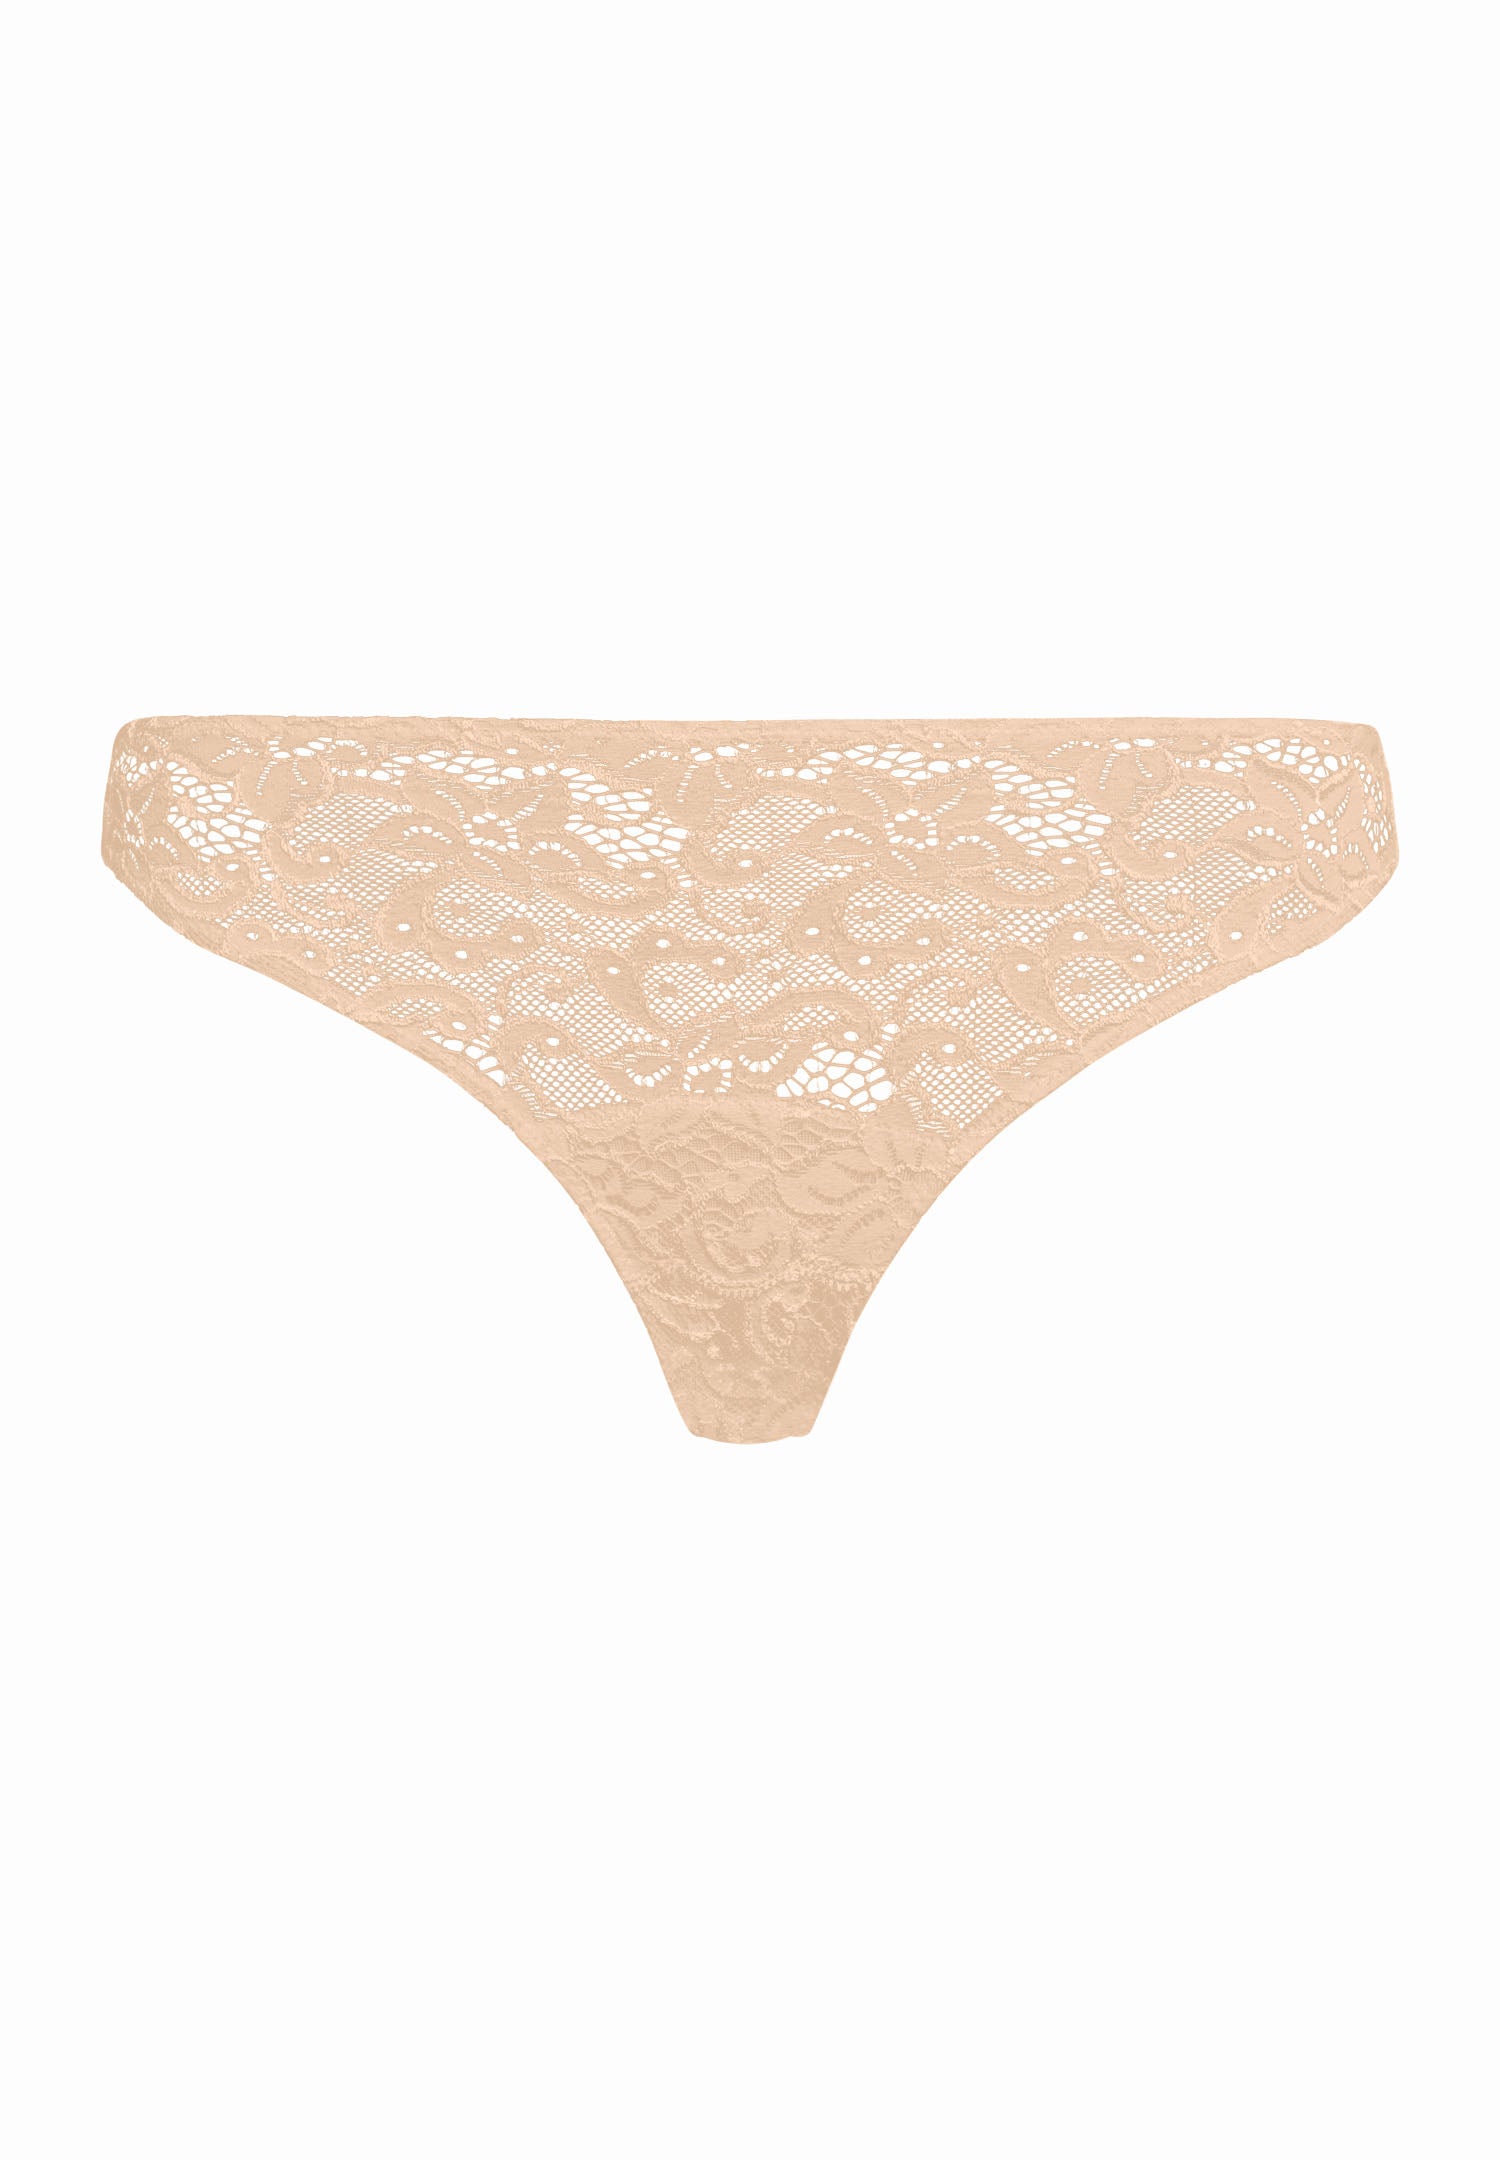 Moments - Lace Thong